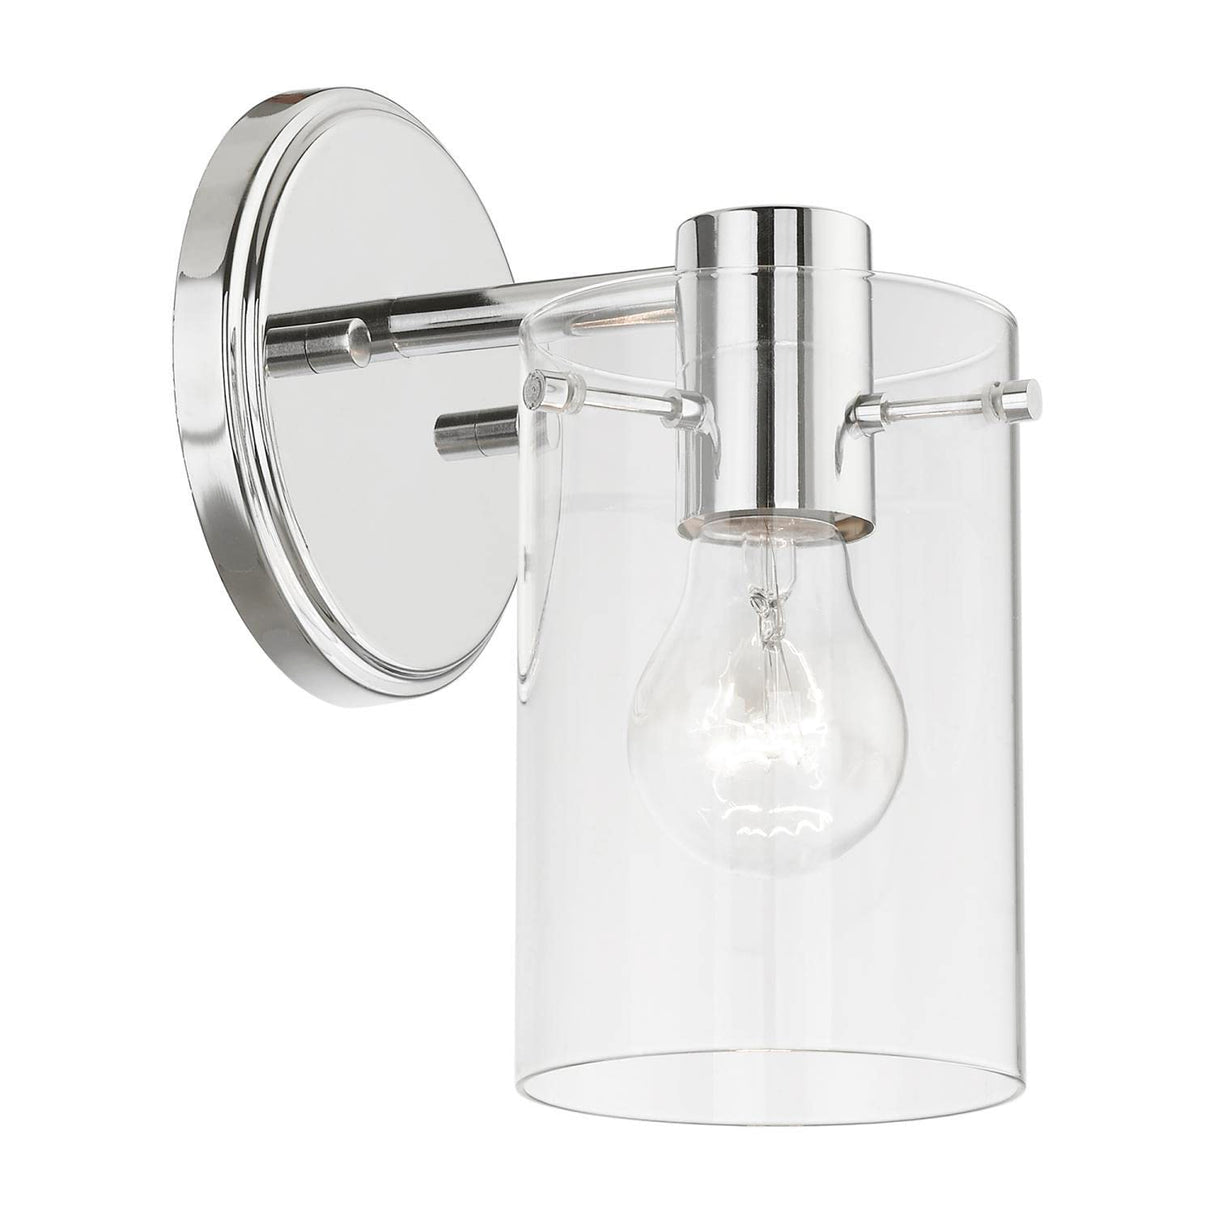 Munich 1 Light Sconce in Polished Chrome (17231-05)